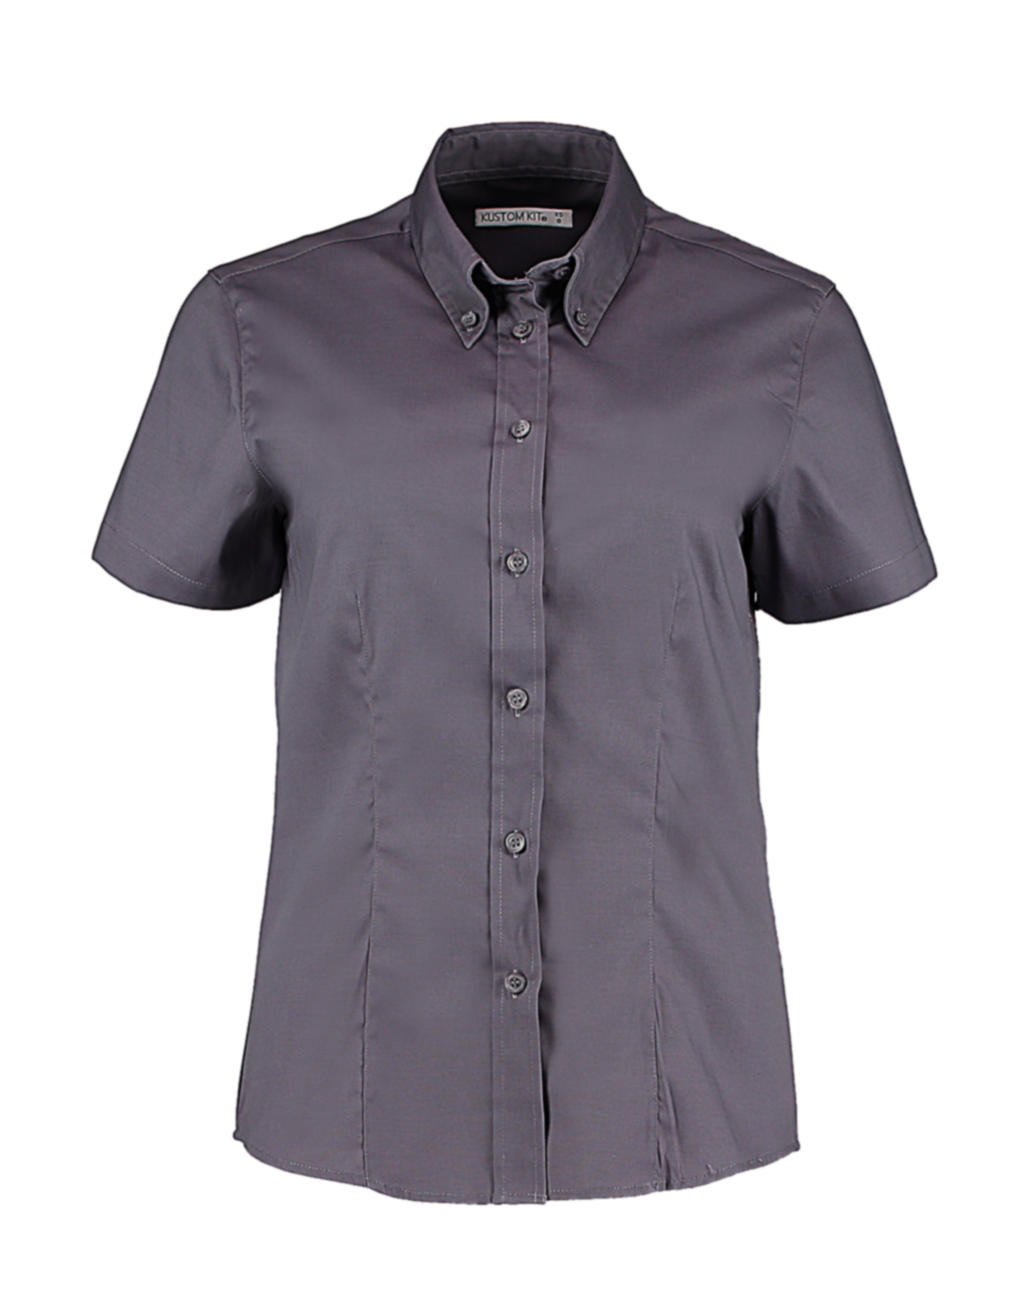  Womens Tailored Fit Premium Oxford Shirt SSL in Farbe Charcoal